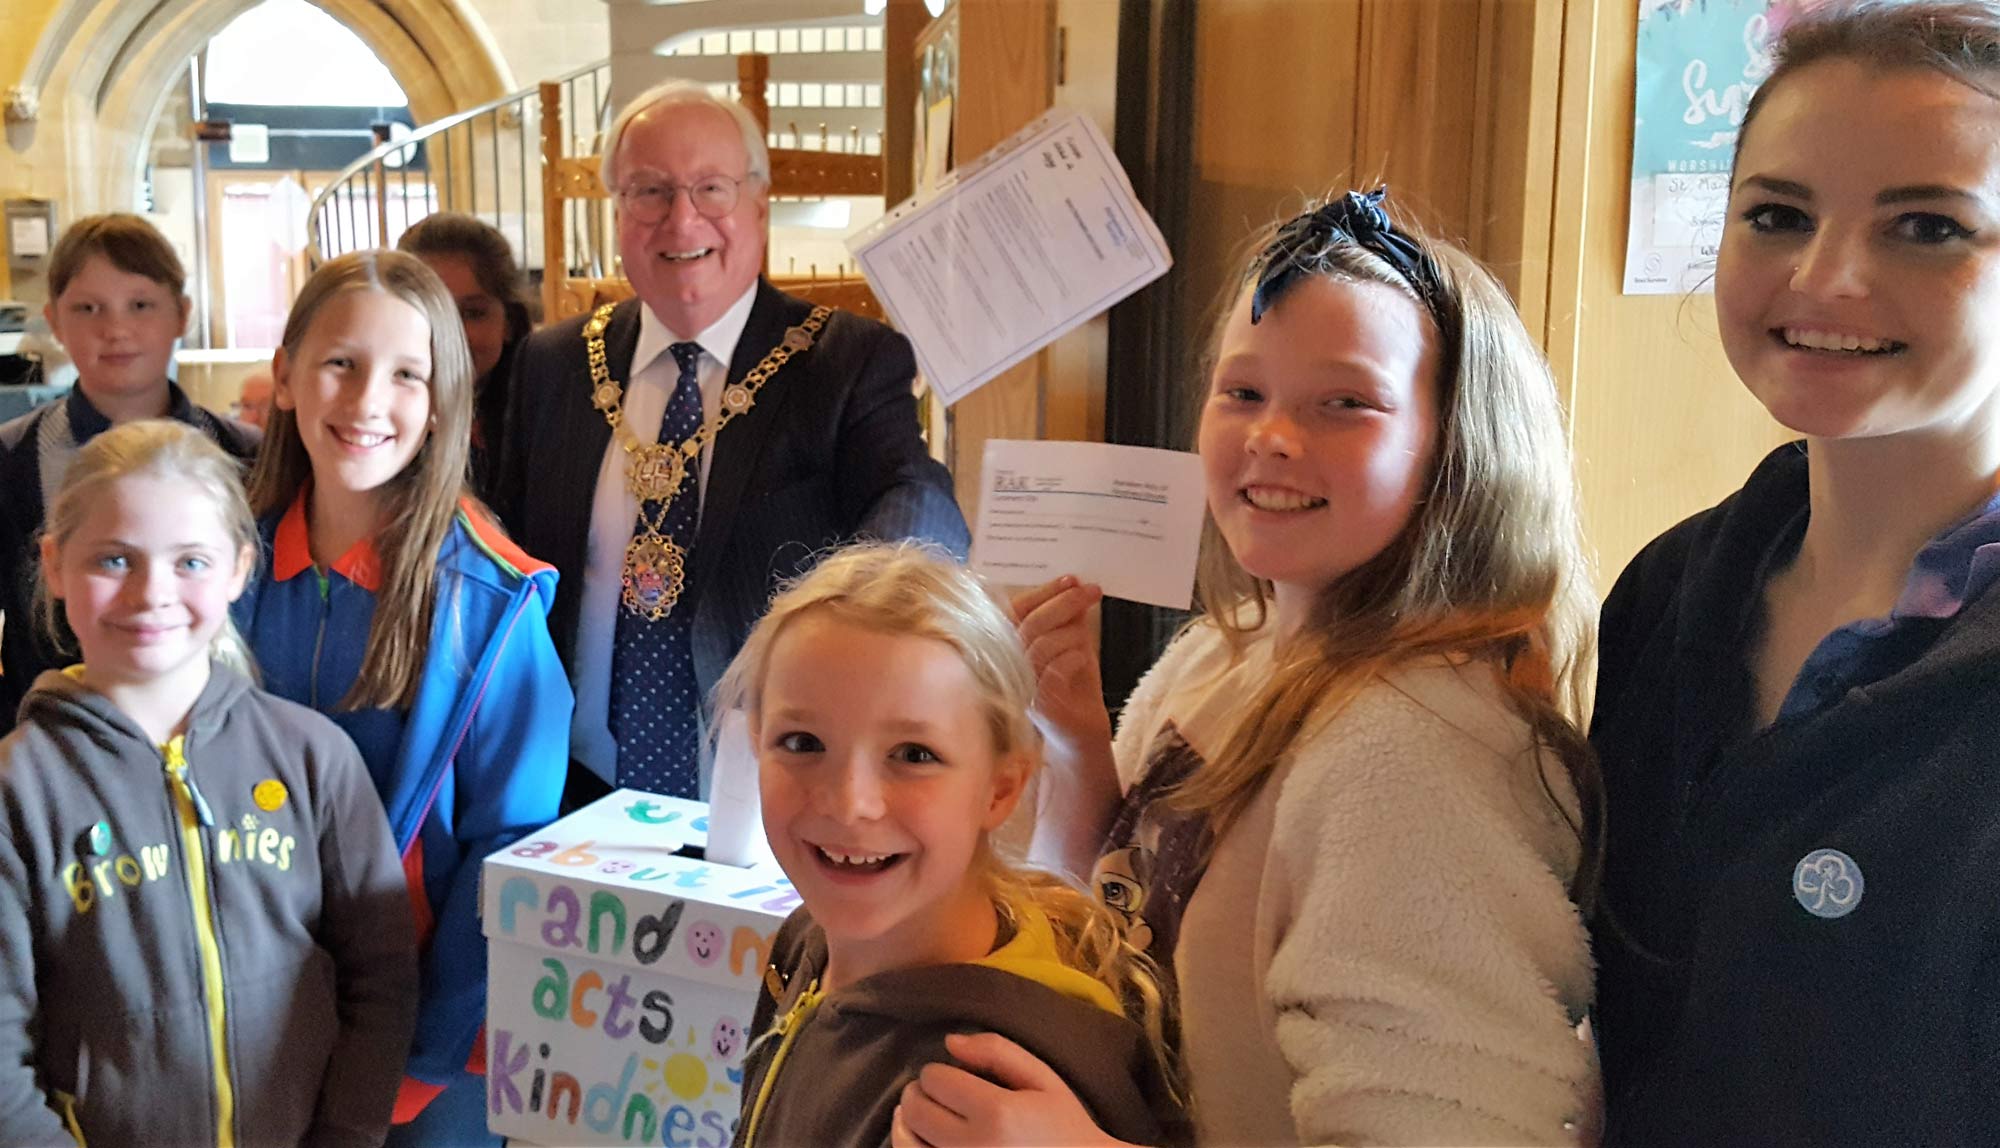 The Oatlands Community Group recently welcomed the Harrogate Mayor, Councillor Nick Brown as he launched Random Acts of Kindness for the month of October.